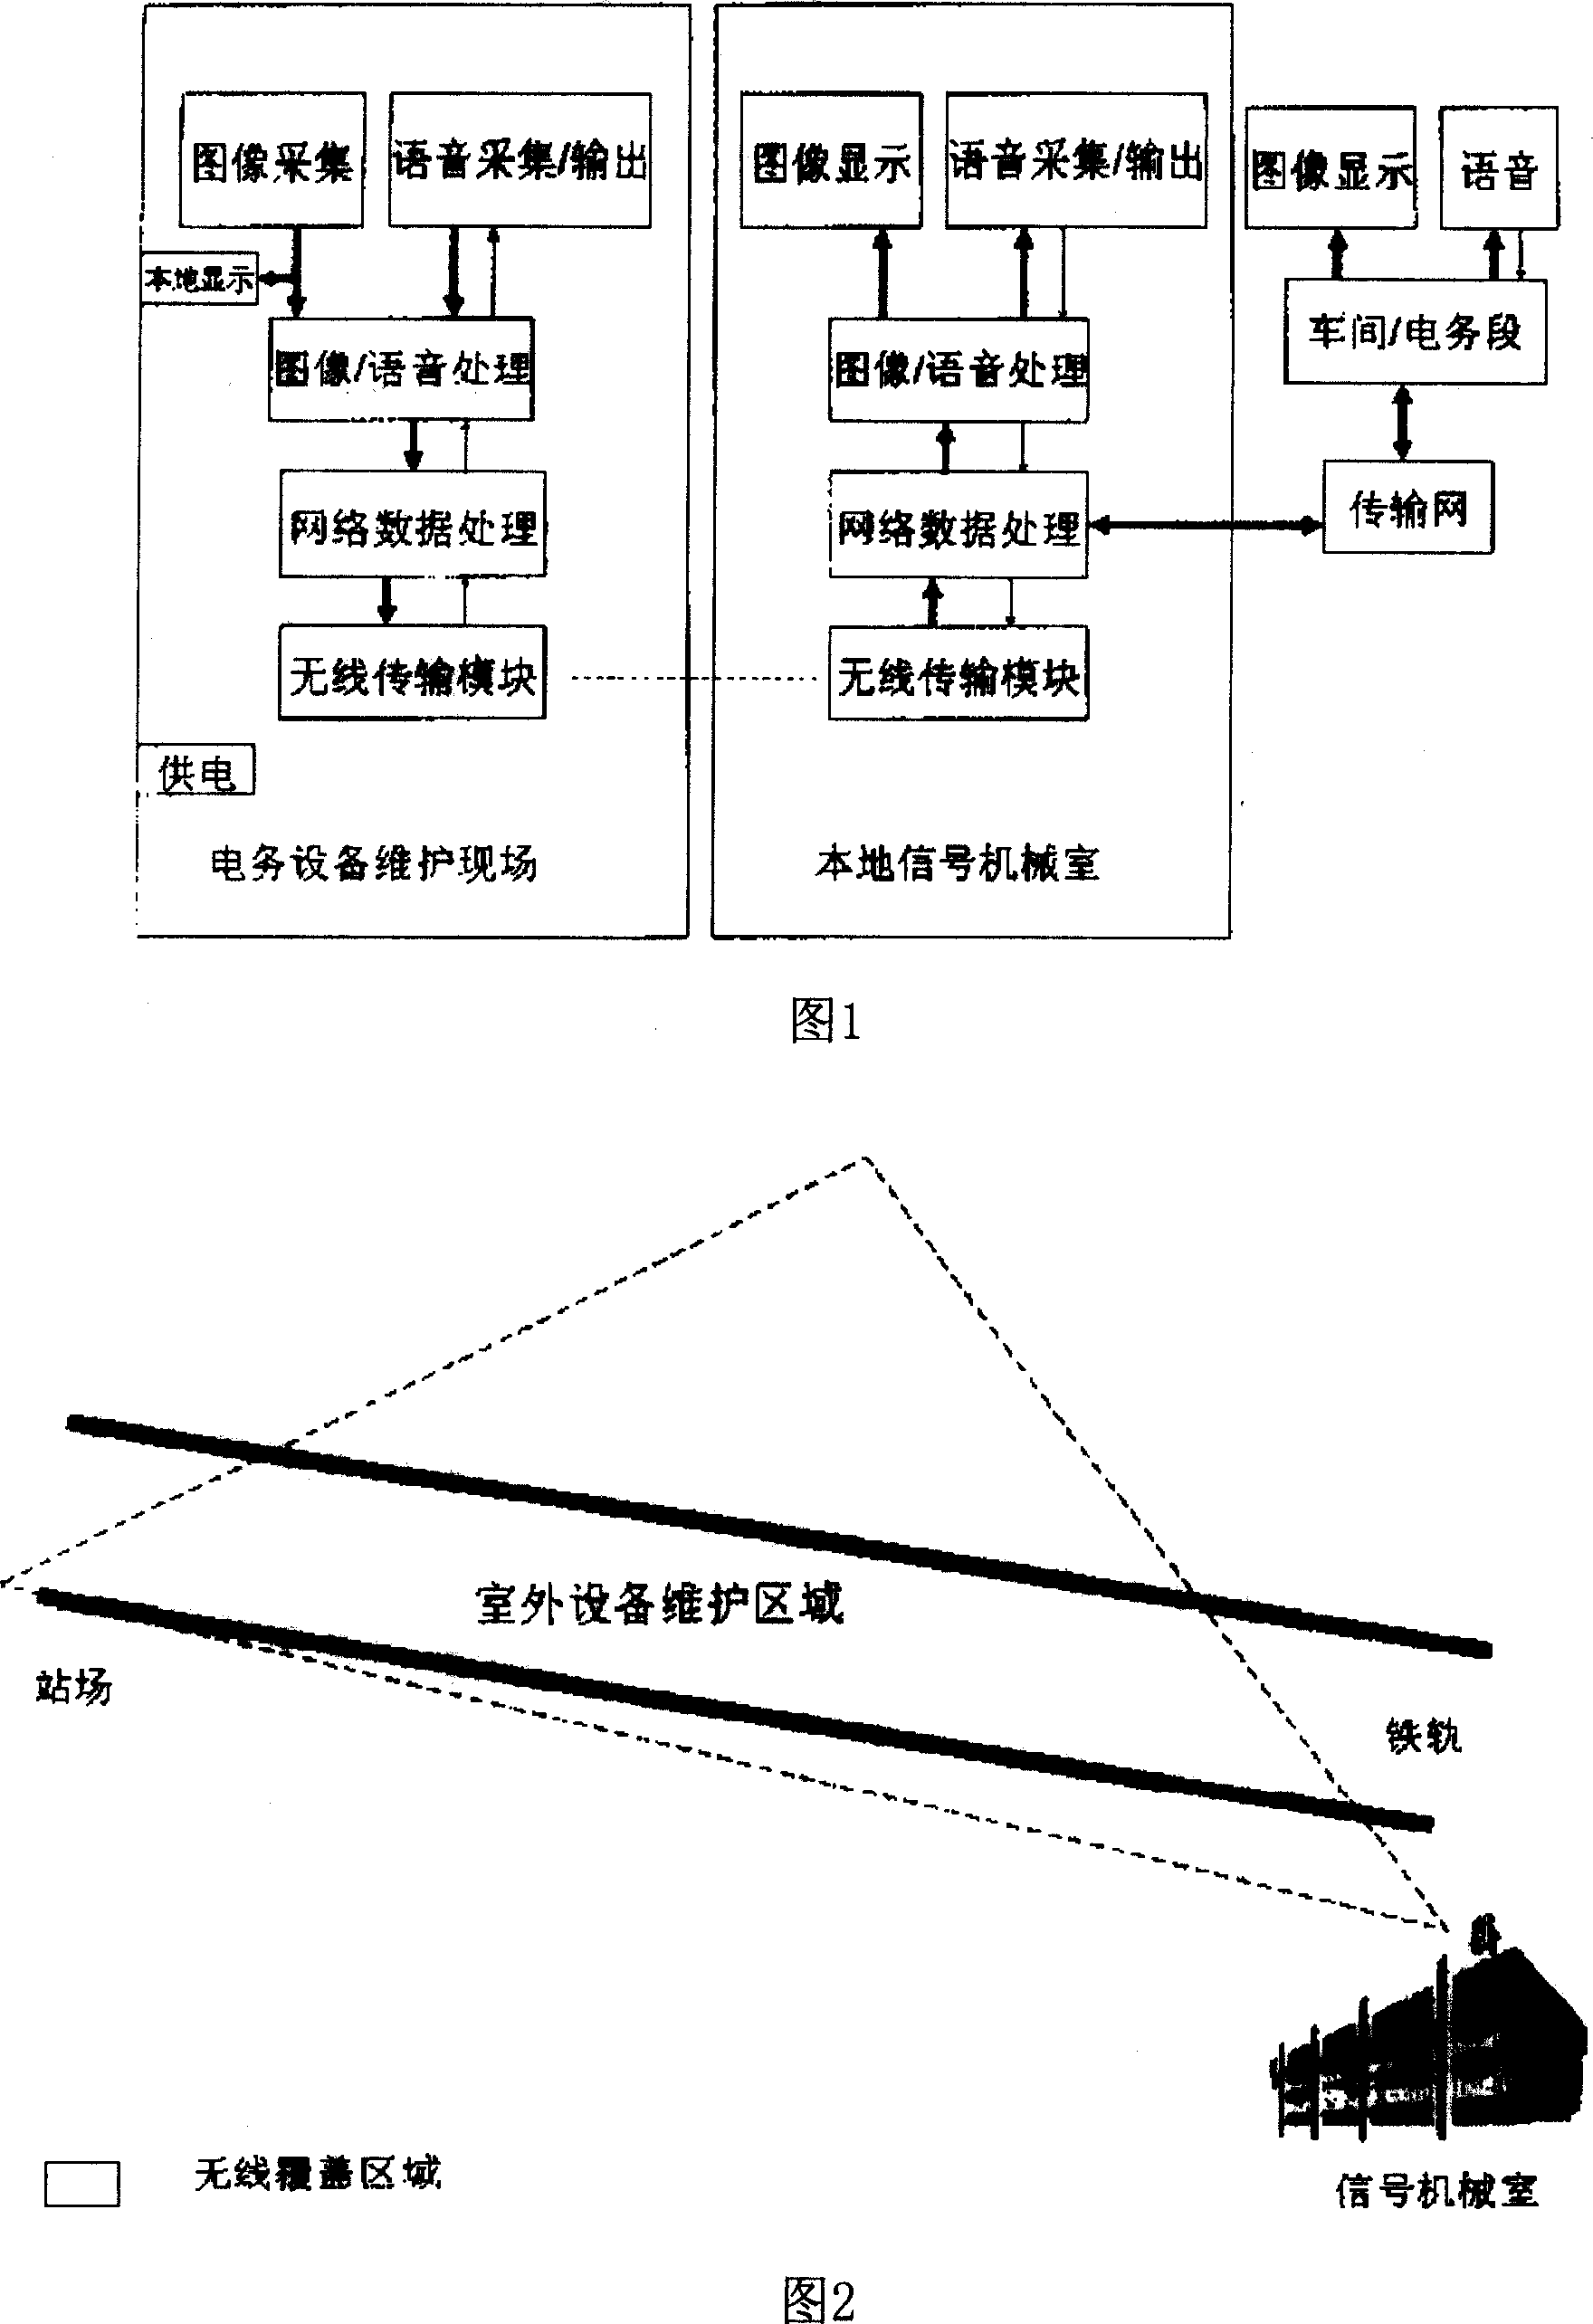 A maintenance method and device for the call signal device